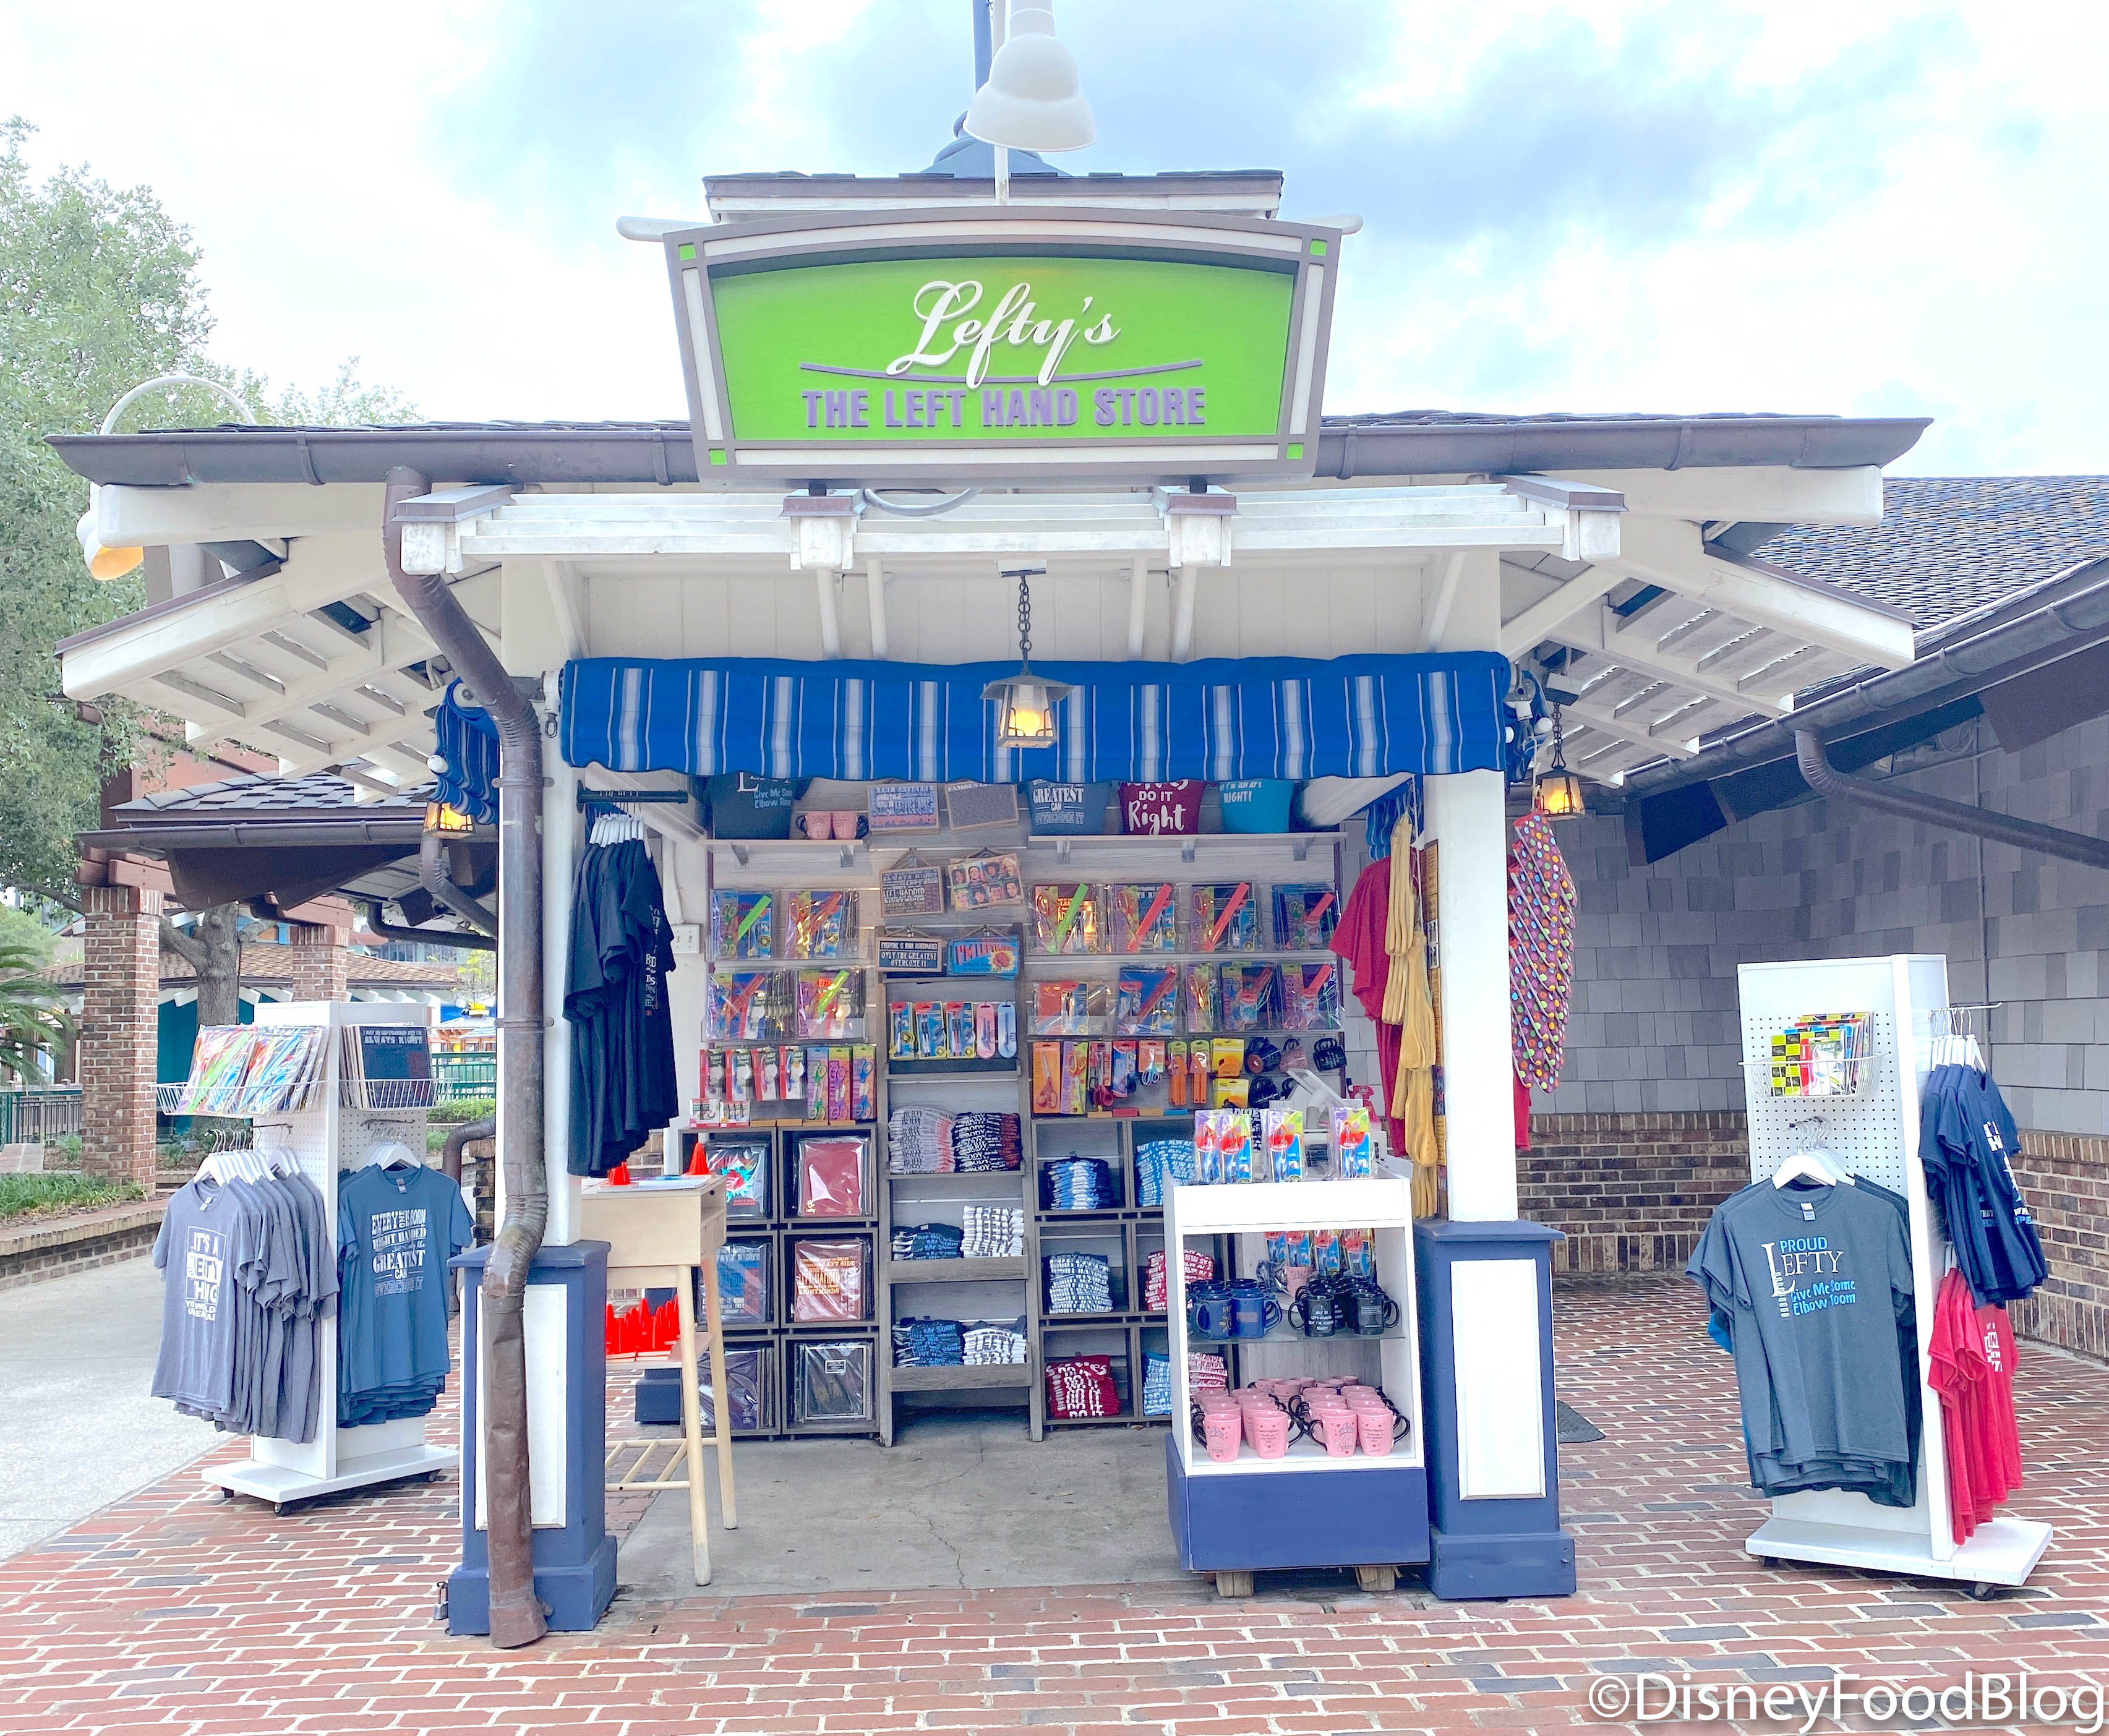 If you're a lefty, you might want to add this shop to your list of des, Disney Springs